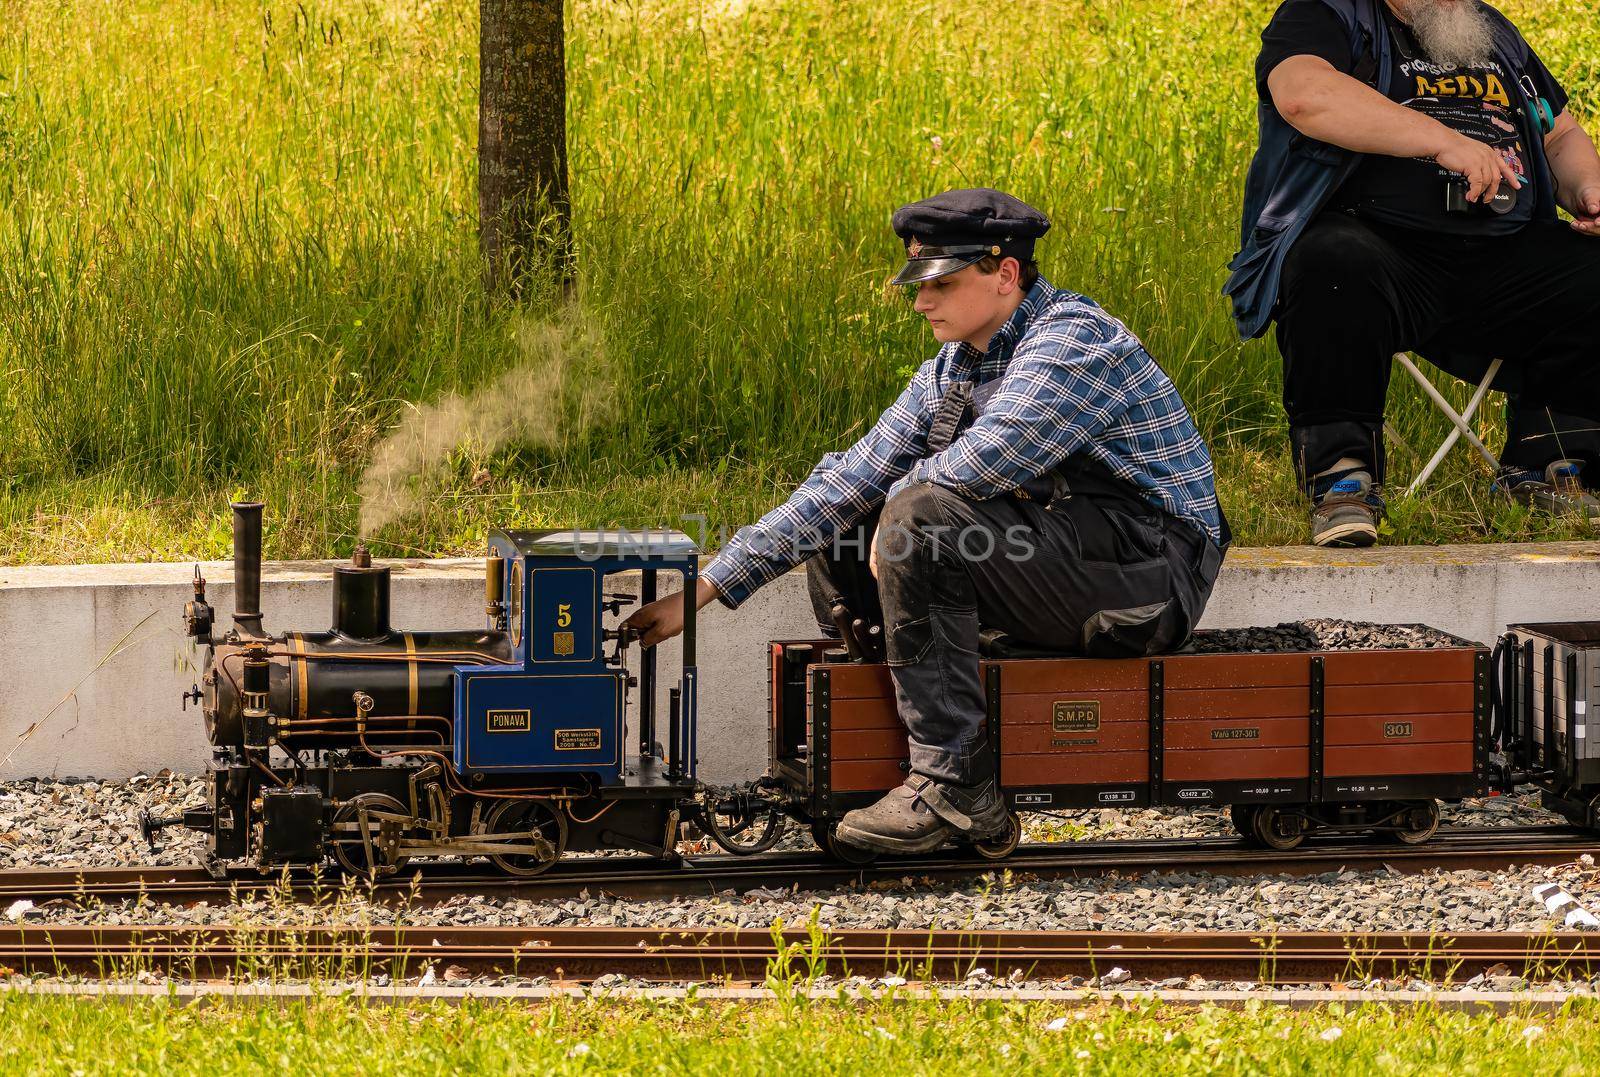 A man operates a model of a steam locomotive by rostik924